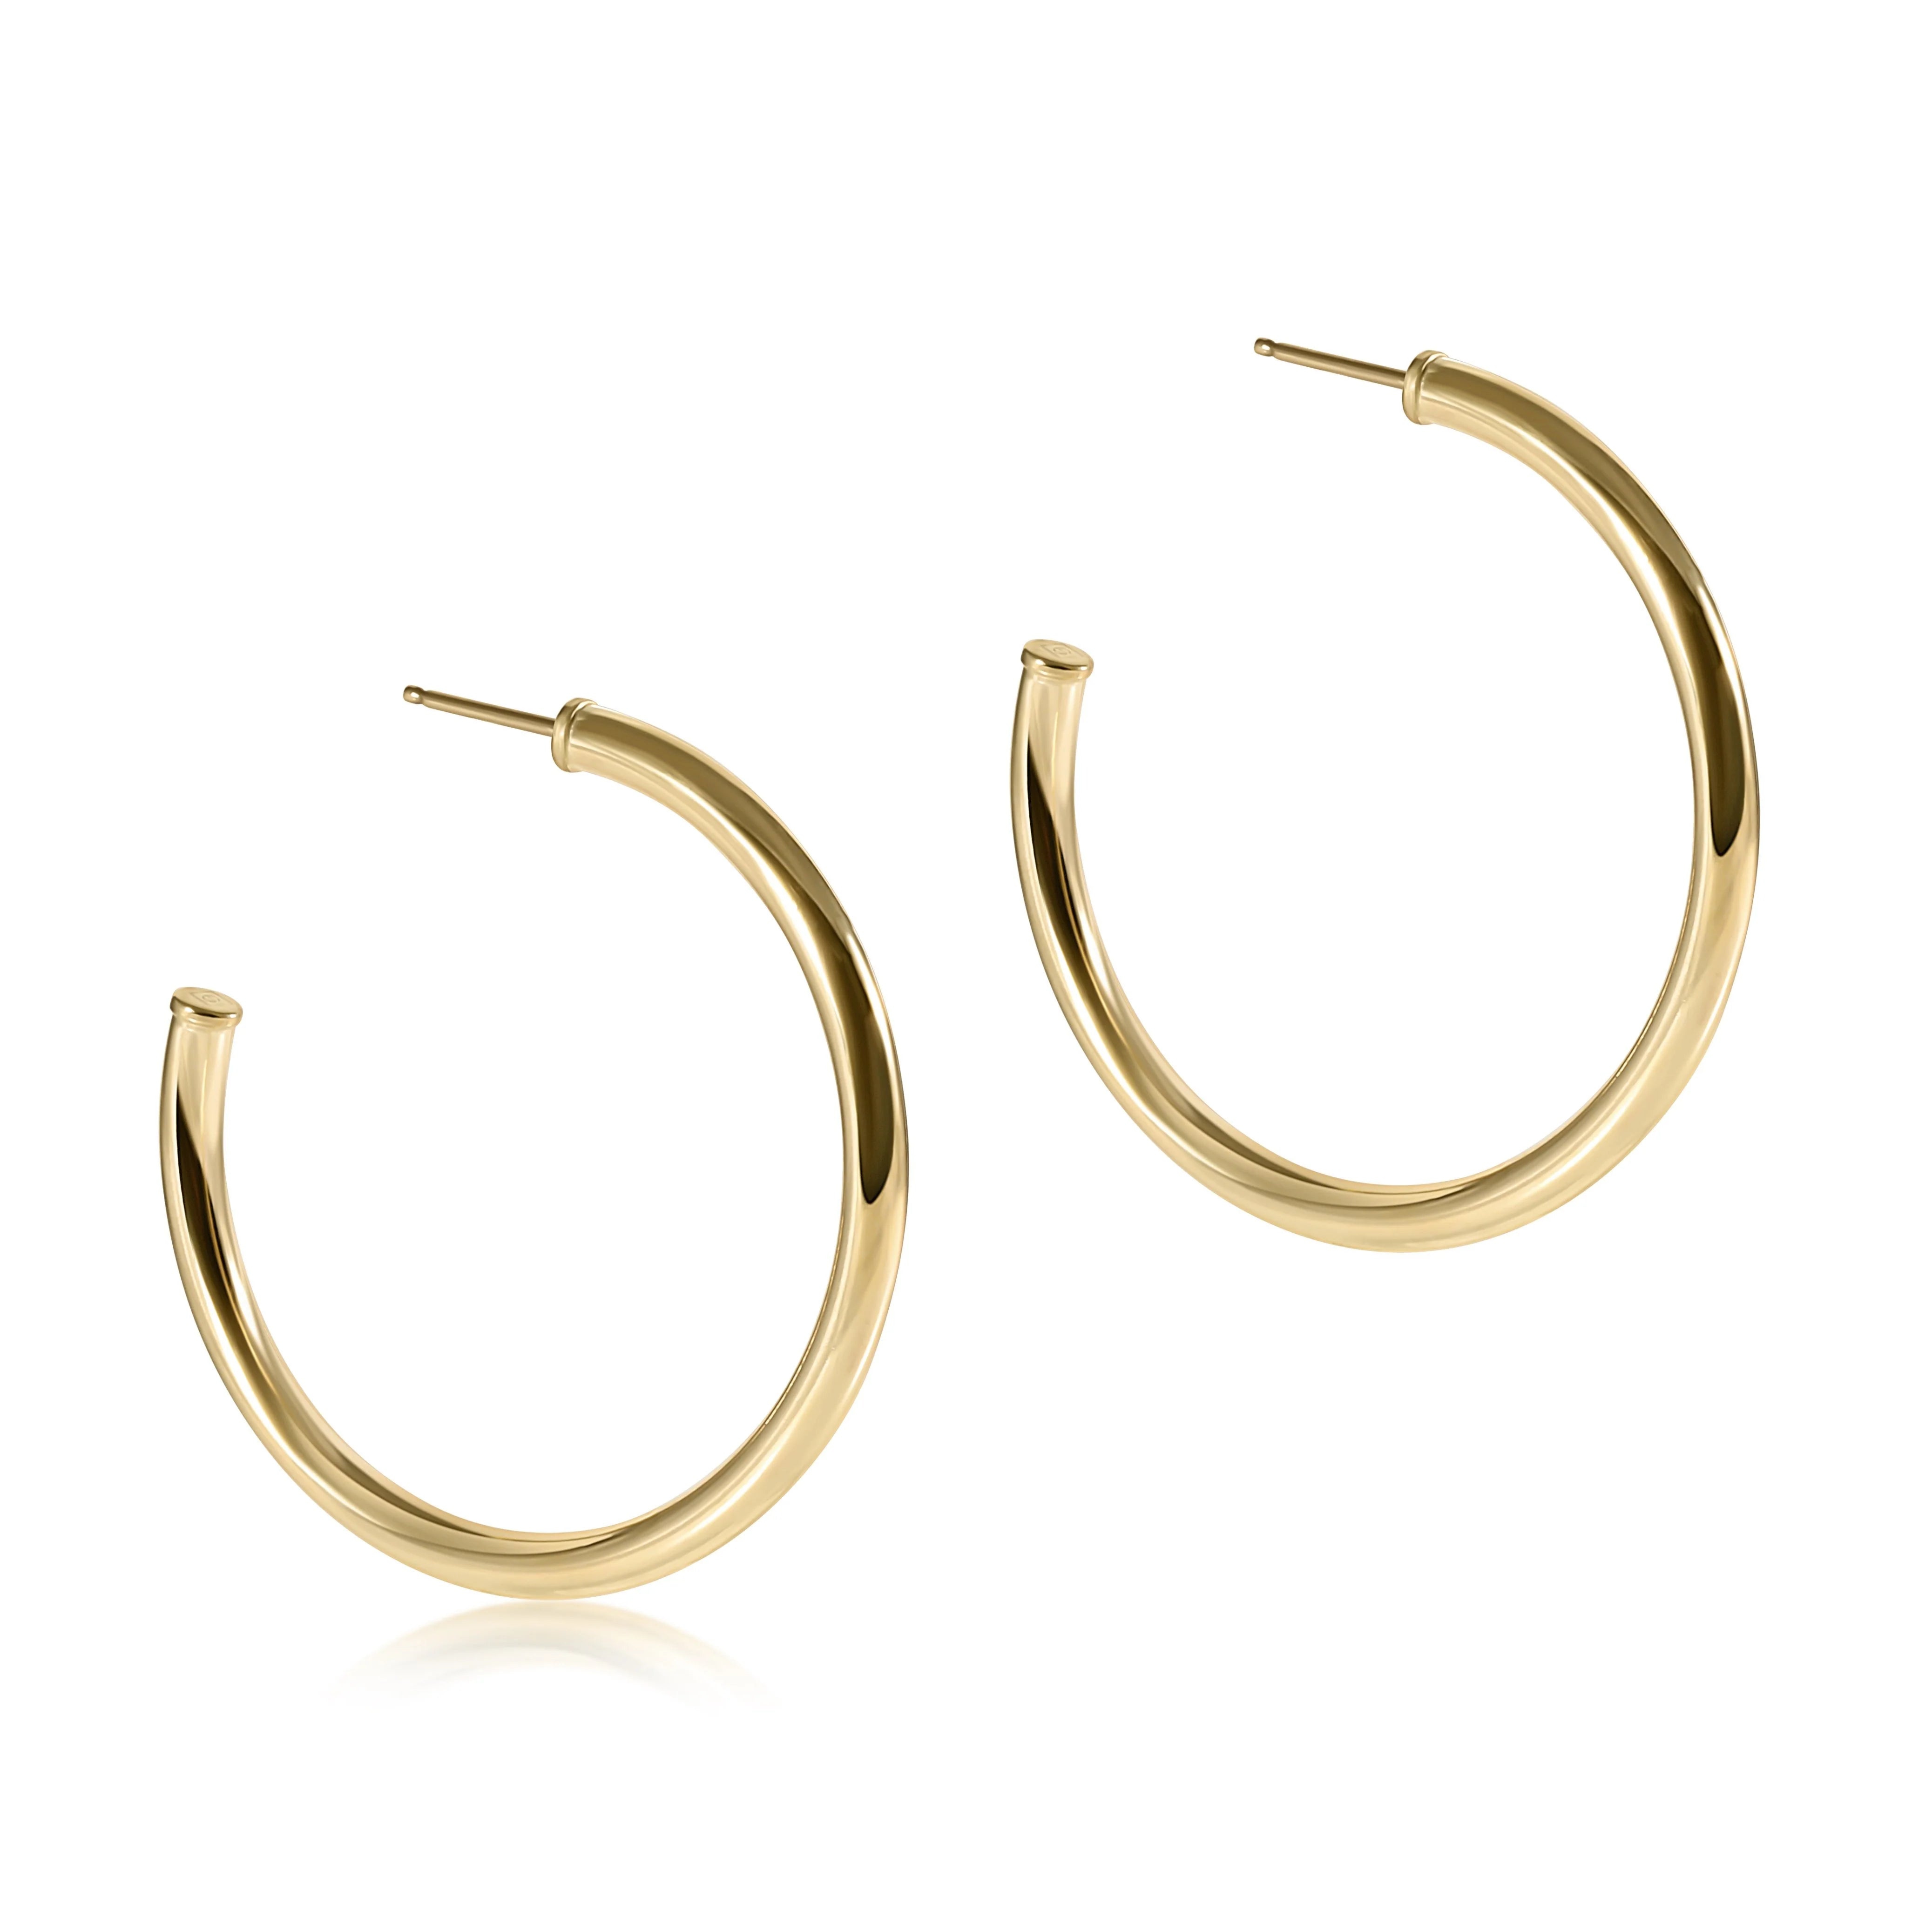 1.5” 3mm Gold Post Hoop-Earrings-eNewton-The Lovely Closet, Women's Fashion Boutique in Alexandria, KY